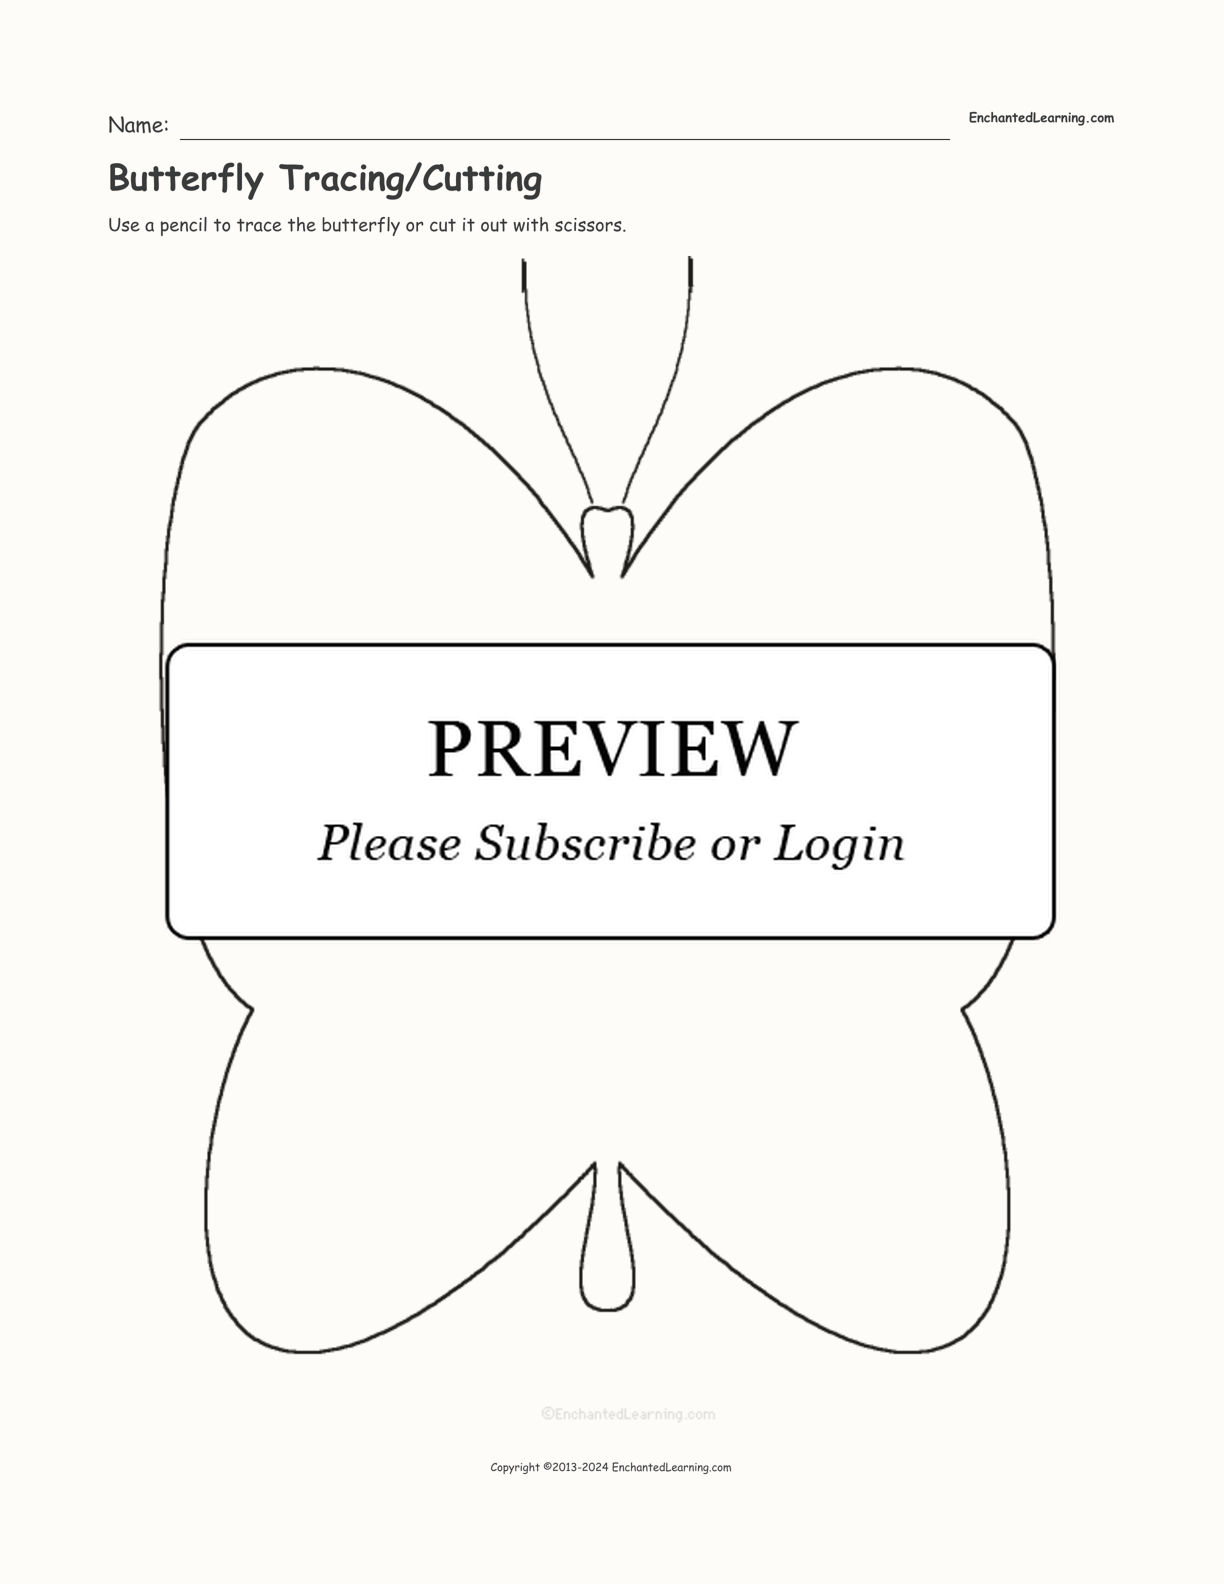 Butterfly Tracing/Cutting interactive worksheet page 1